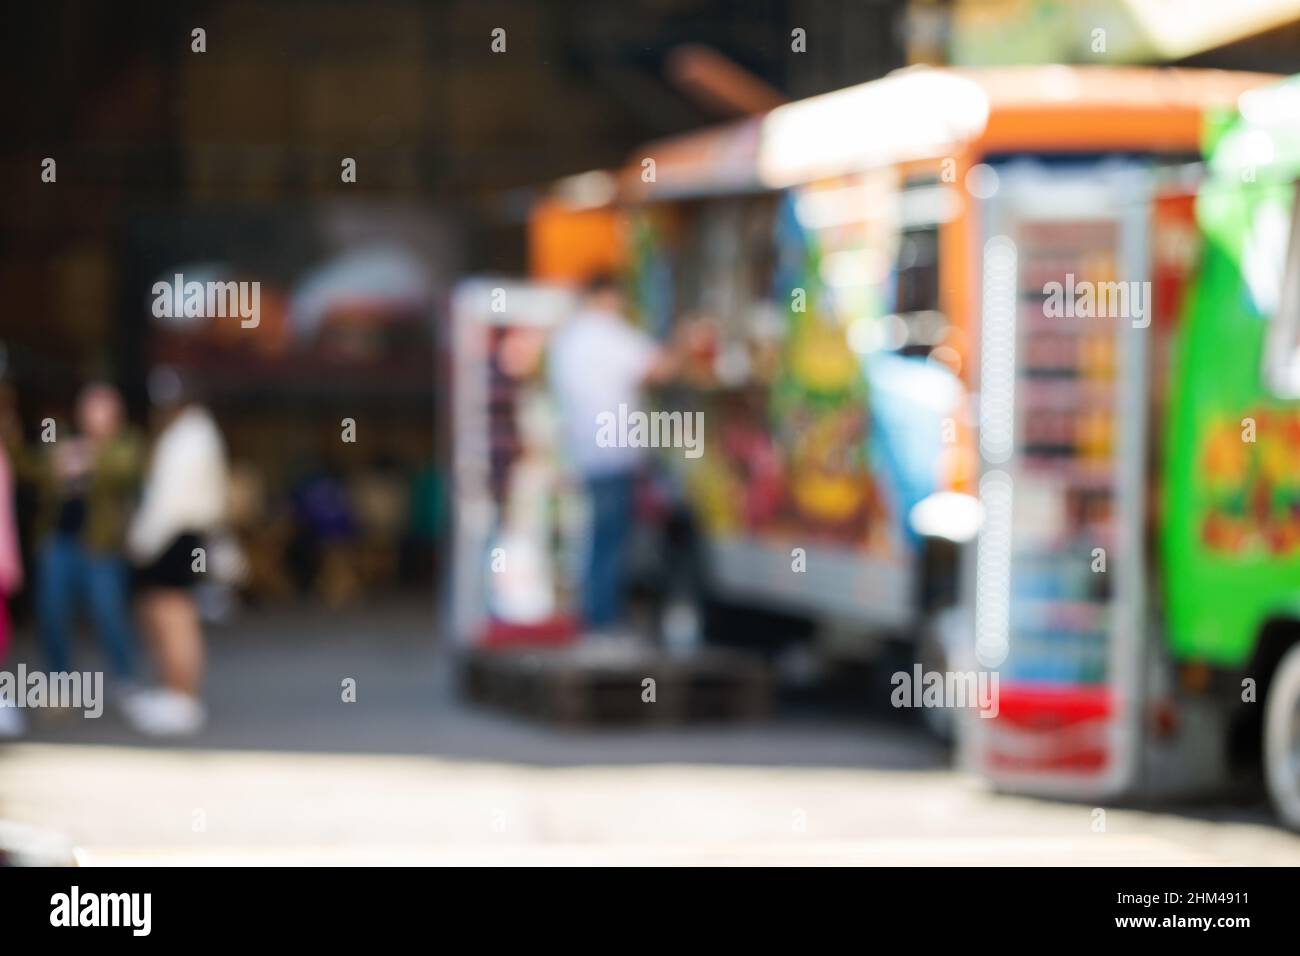 Abstract blurred background of food trucks. People buying food in a foodtruck Stock Photo